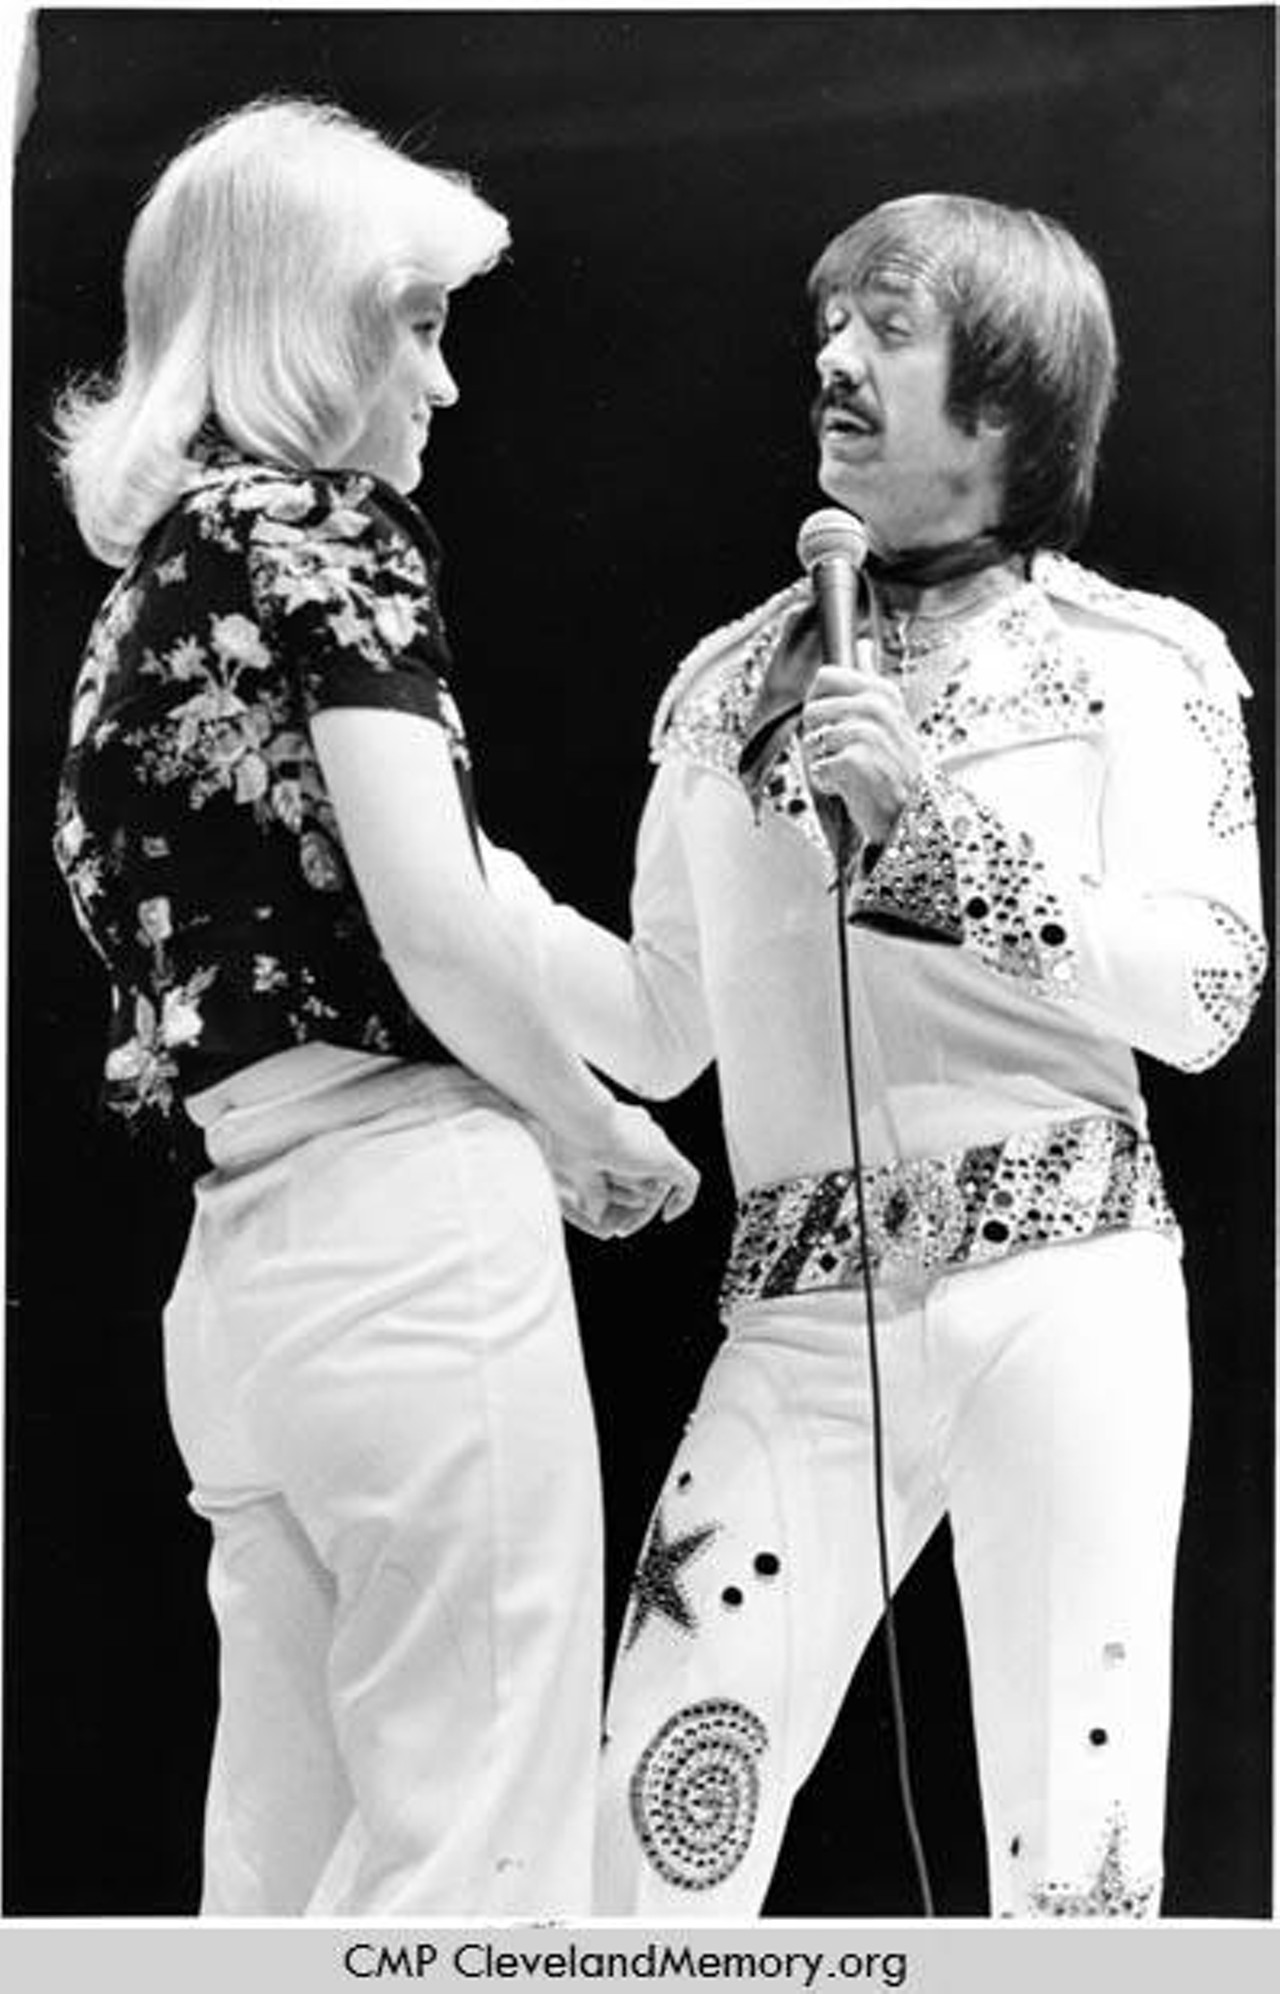 Women pulled on stage during a Sonny Bono show, 1977